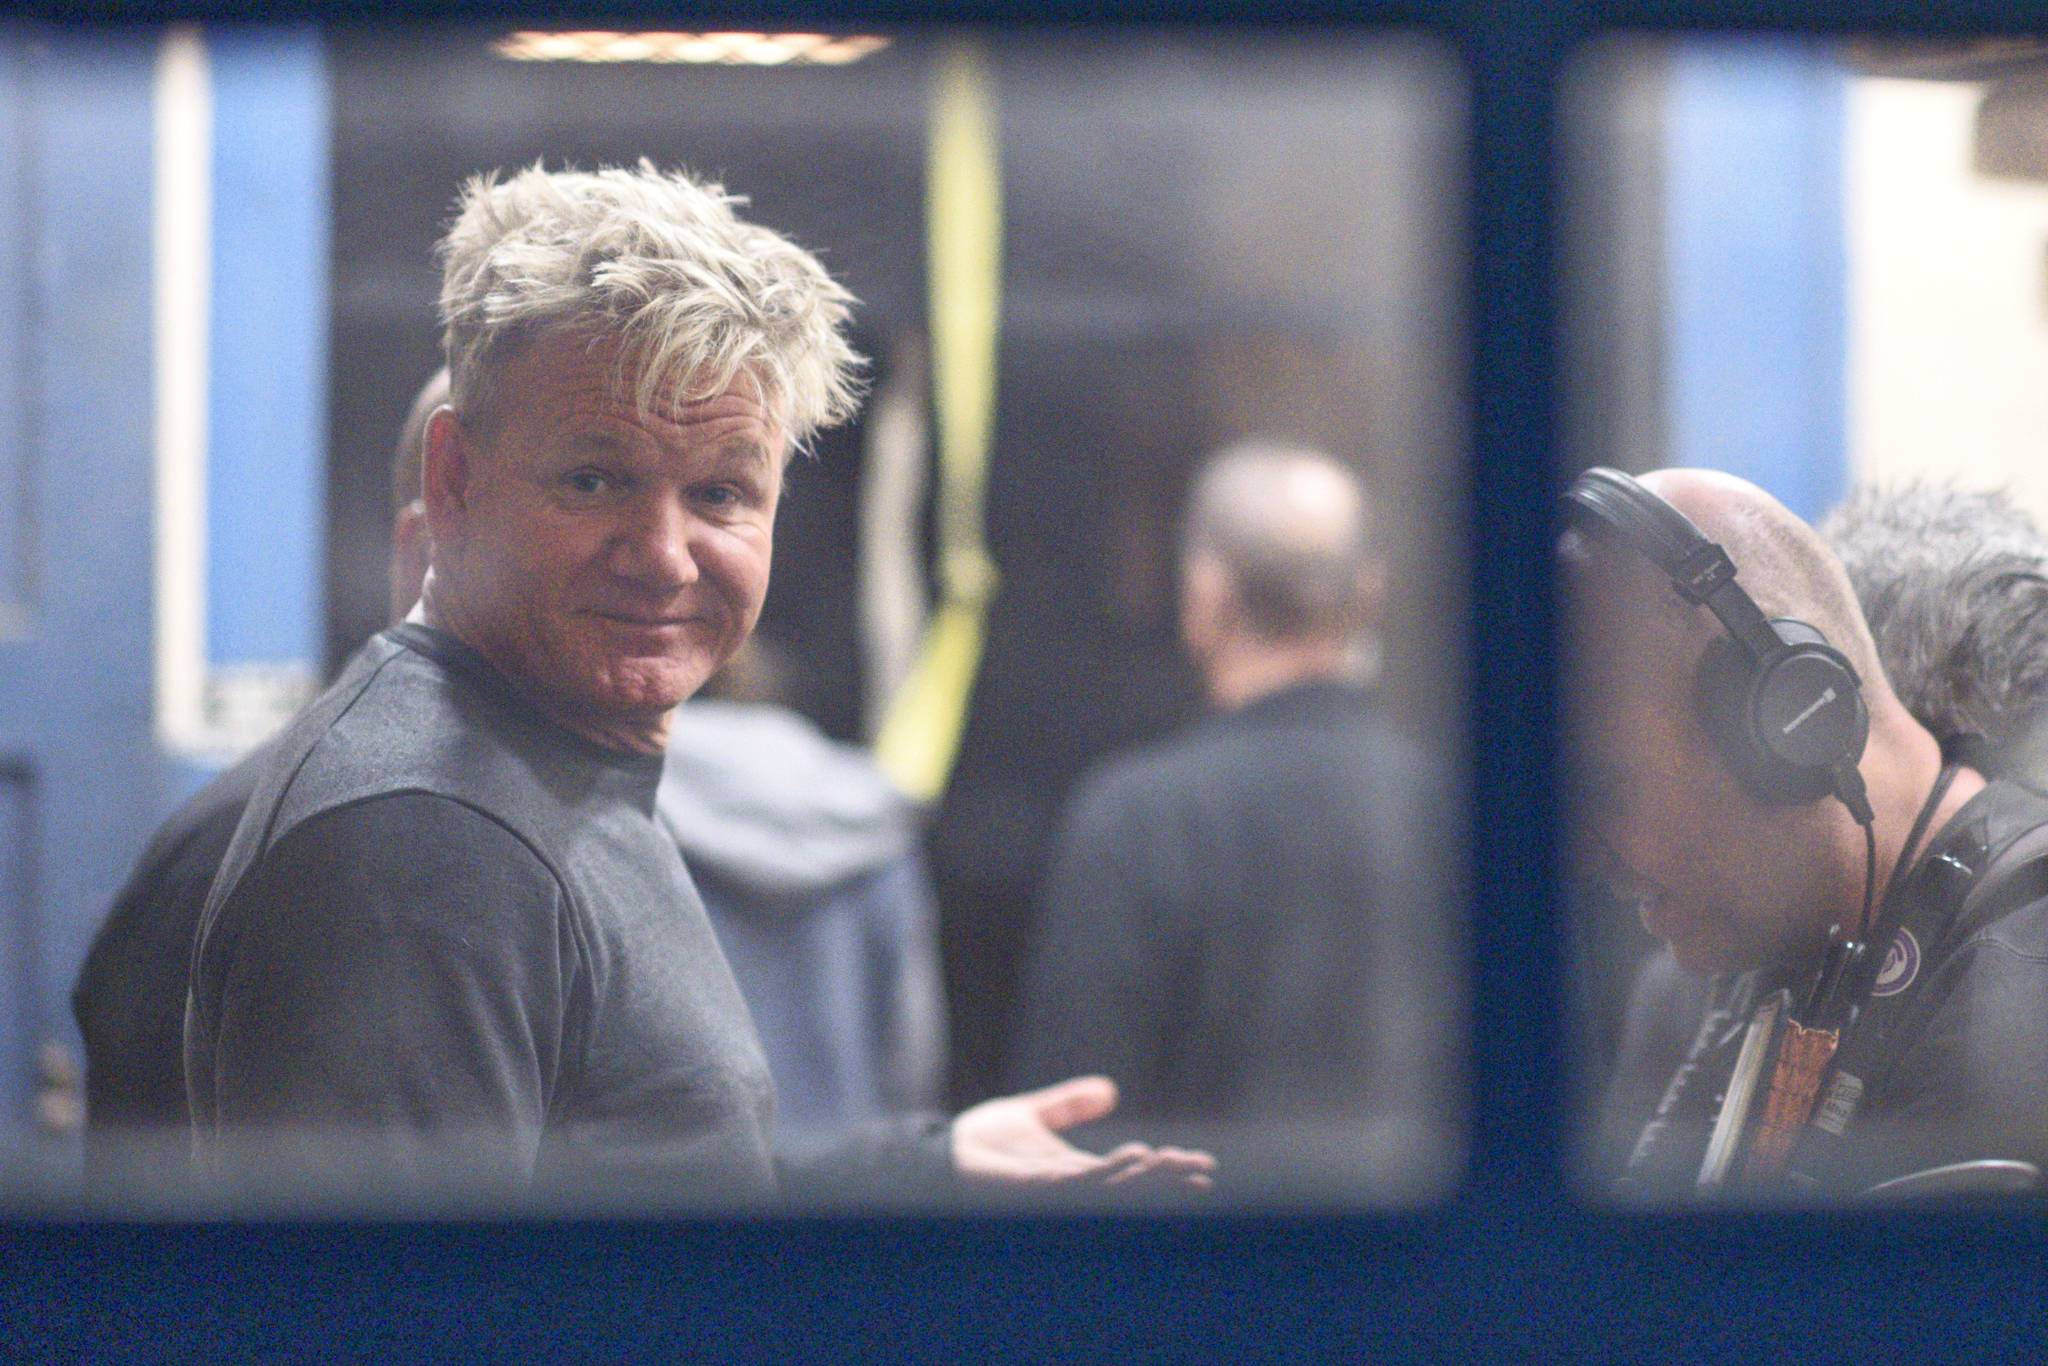 Chef Gordon Ramsay at a downtown site filming on Monday, Feb. 11, 2019. (Michael Penn | Juneau Empire)